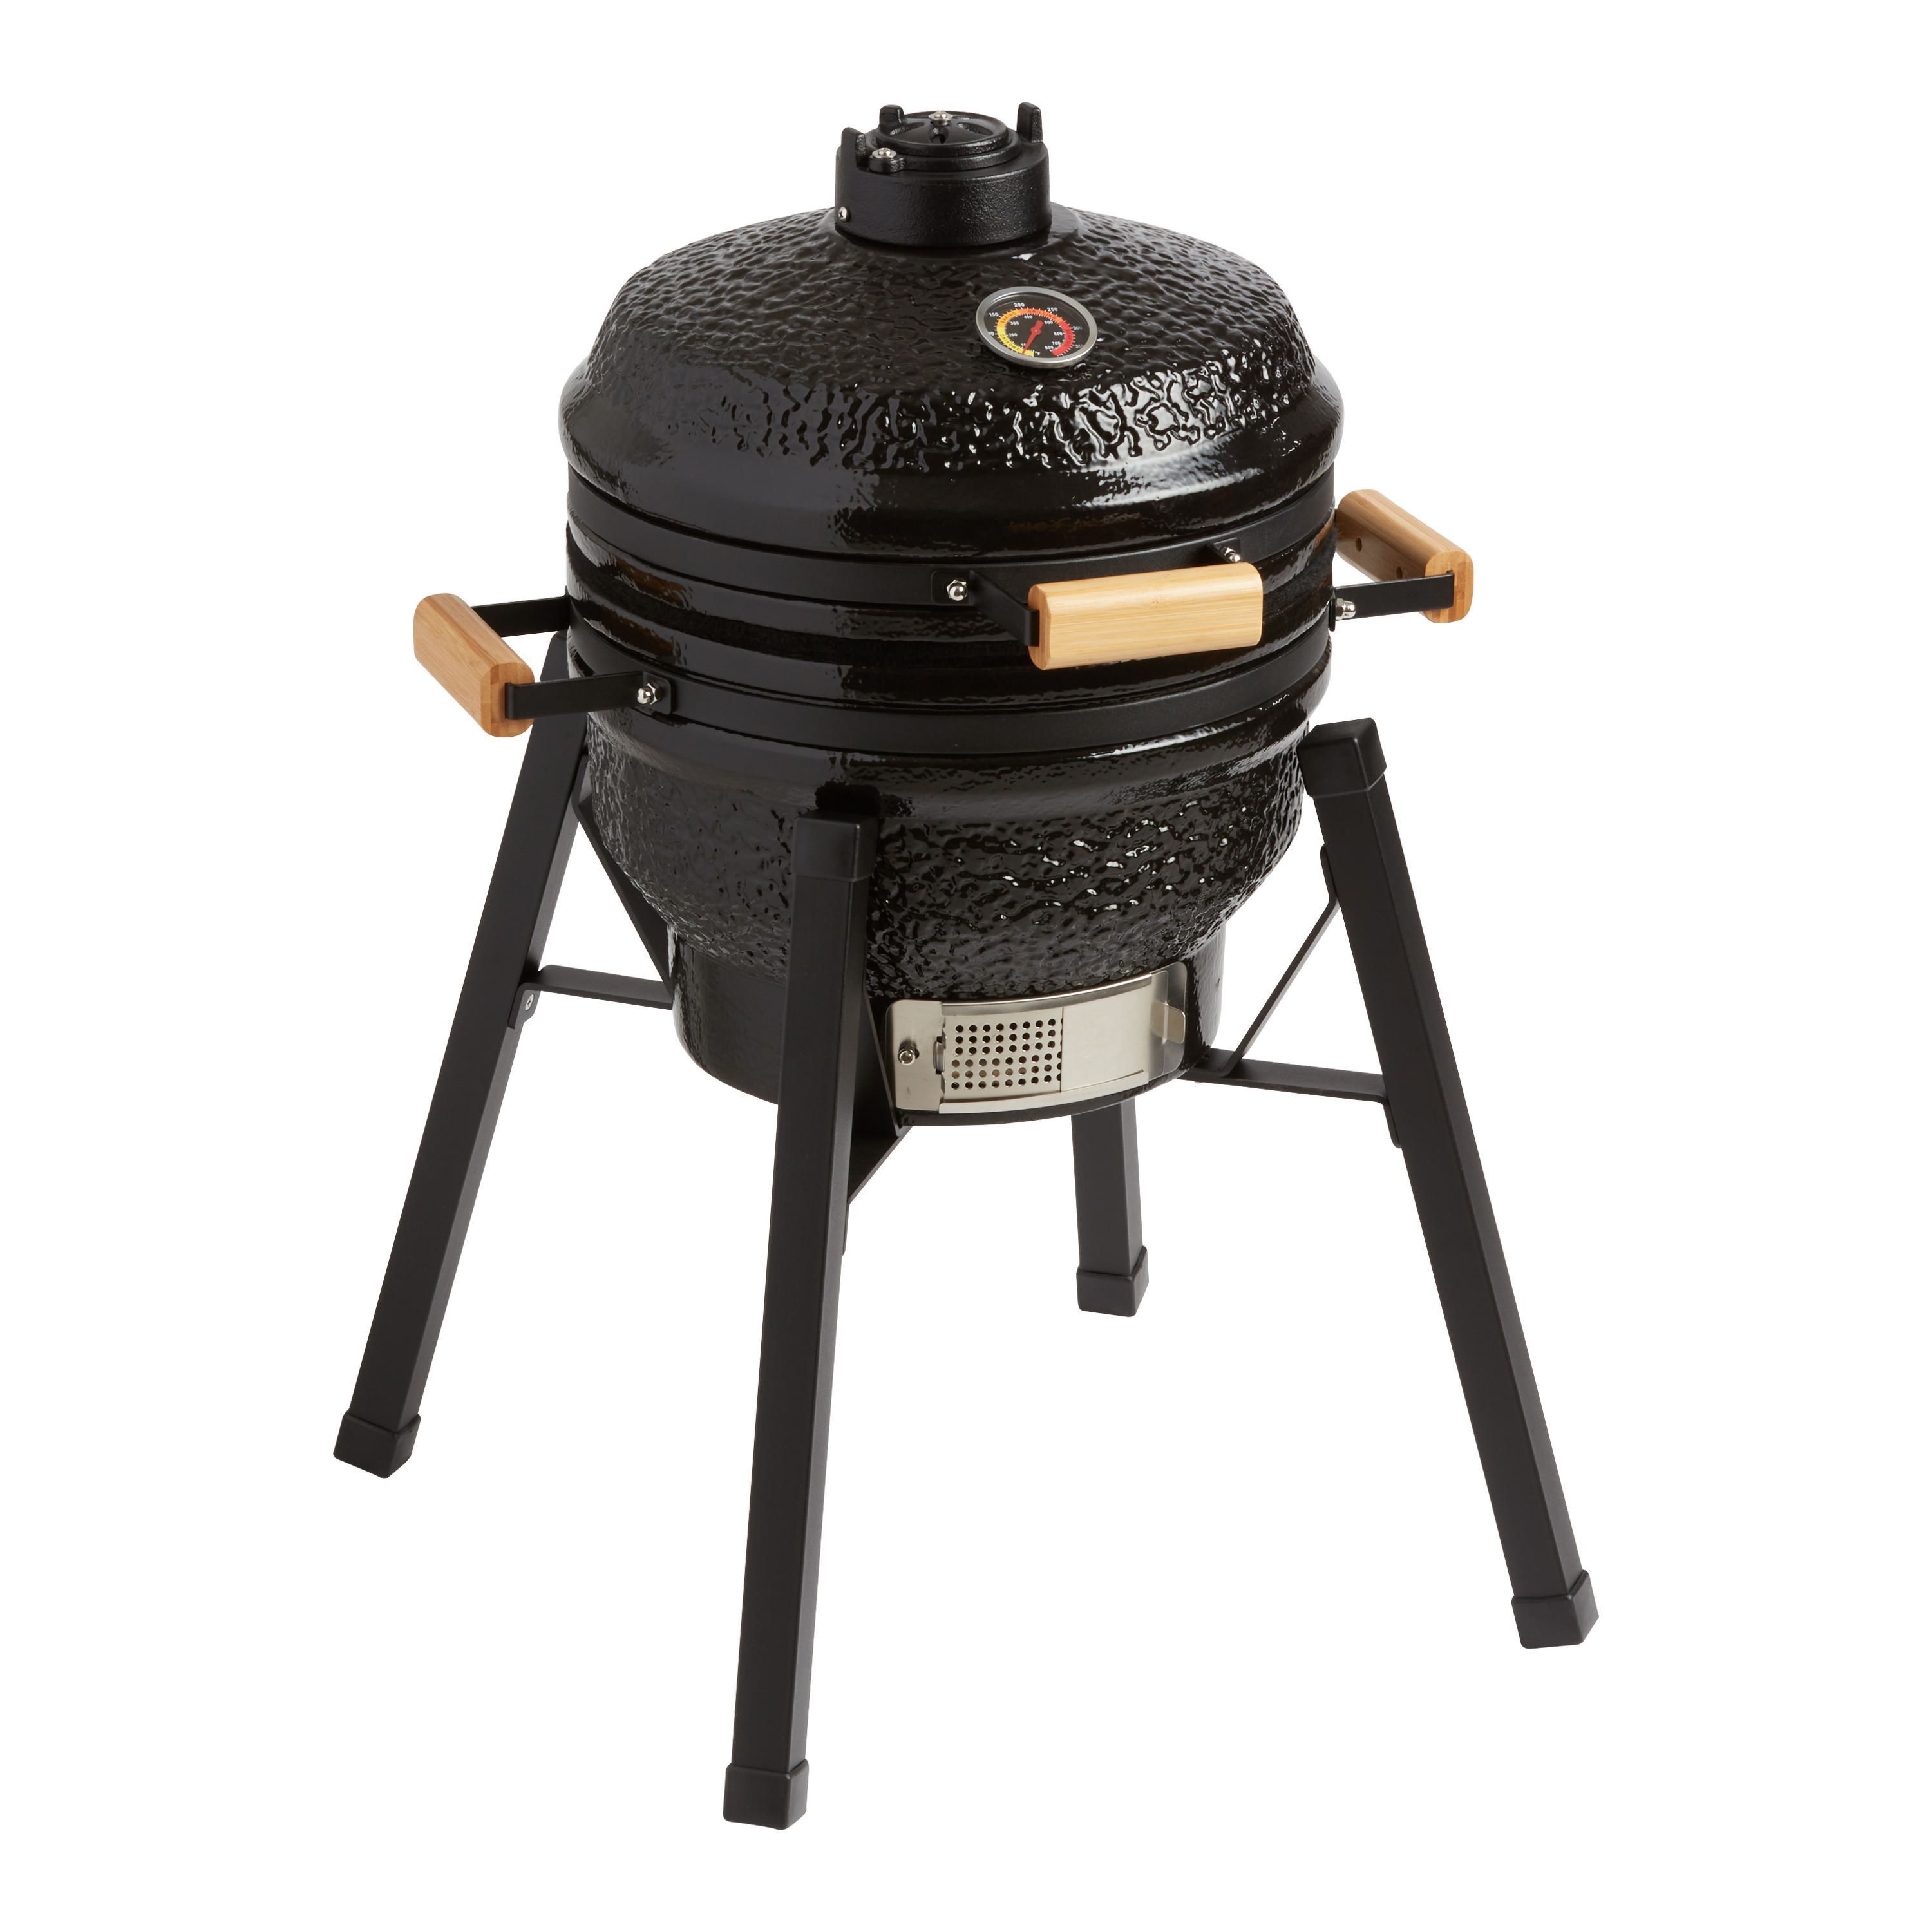 Black Cast Iron and Ceramic Kamado Grill with Stand | World Market